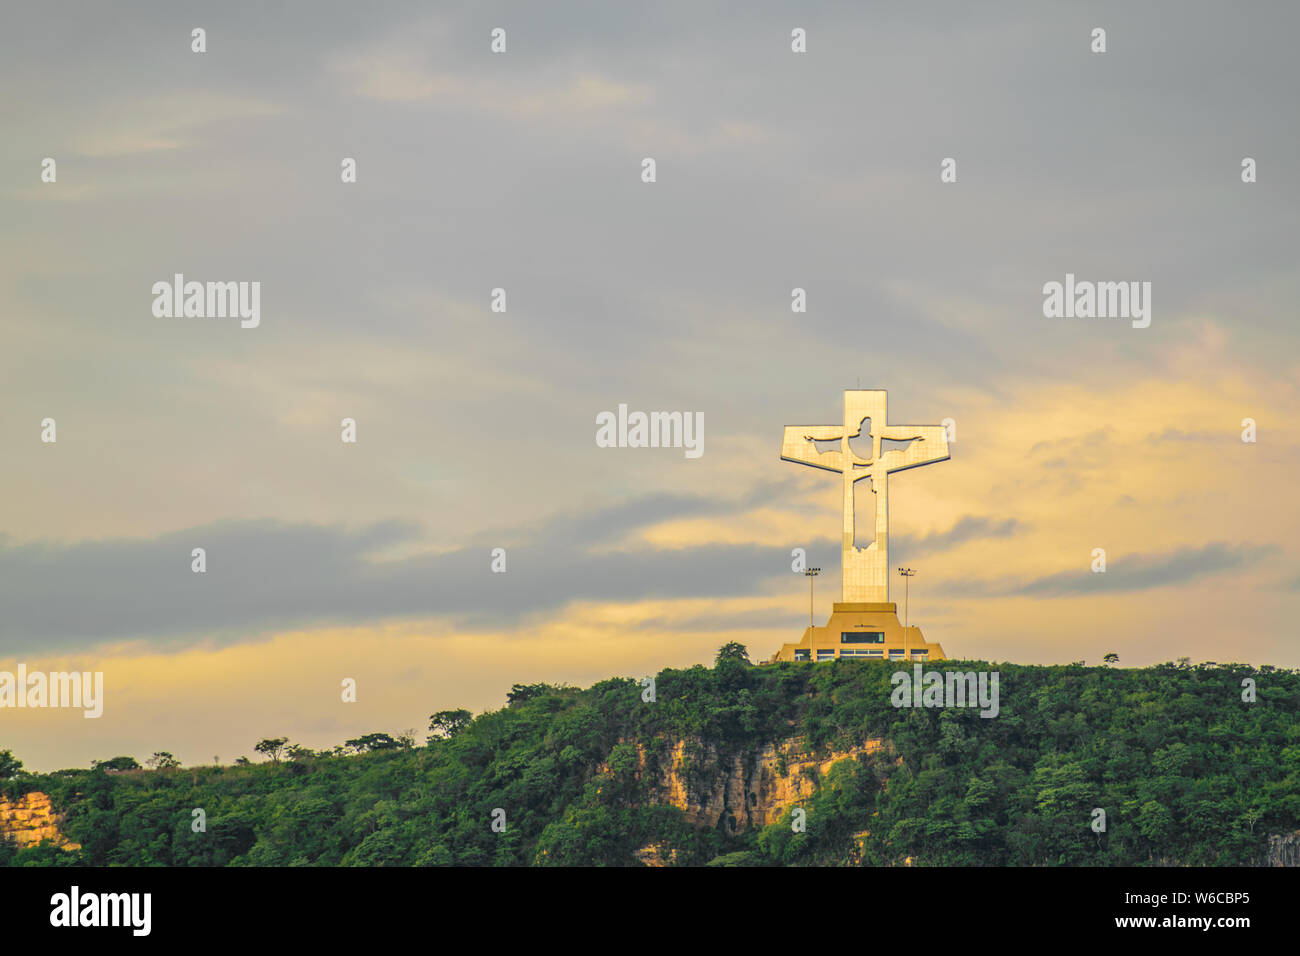 The Christ of Chiapas is a 203 foot tall cross located in village of Copoyo, overlooking the city of Tuxtla Gutiérrez, the capital of Chiapas. Stock Photo